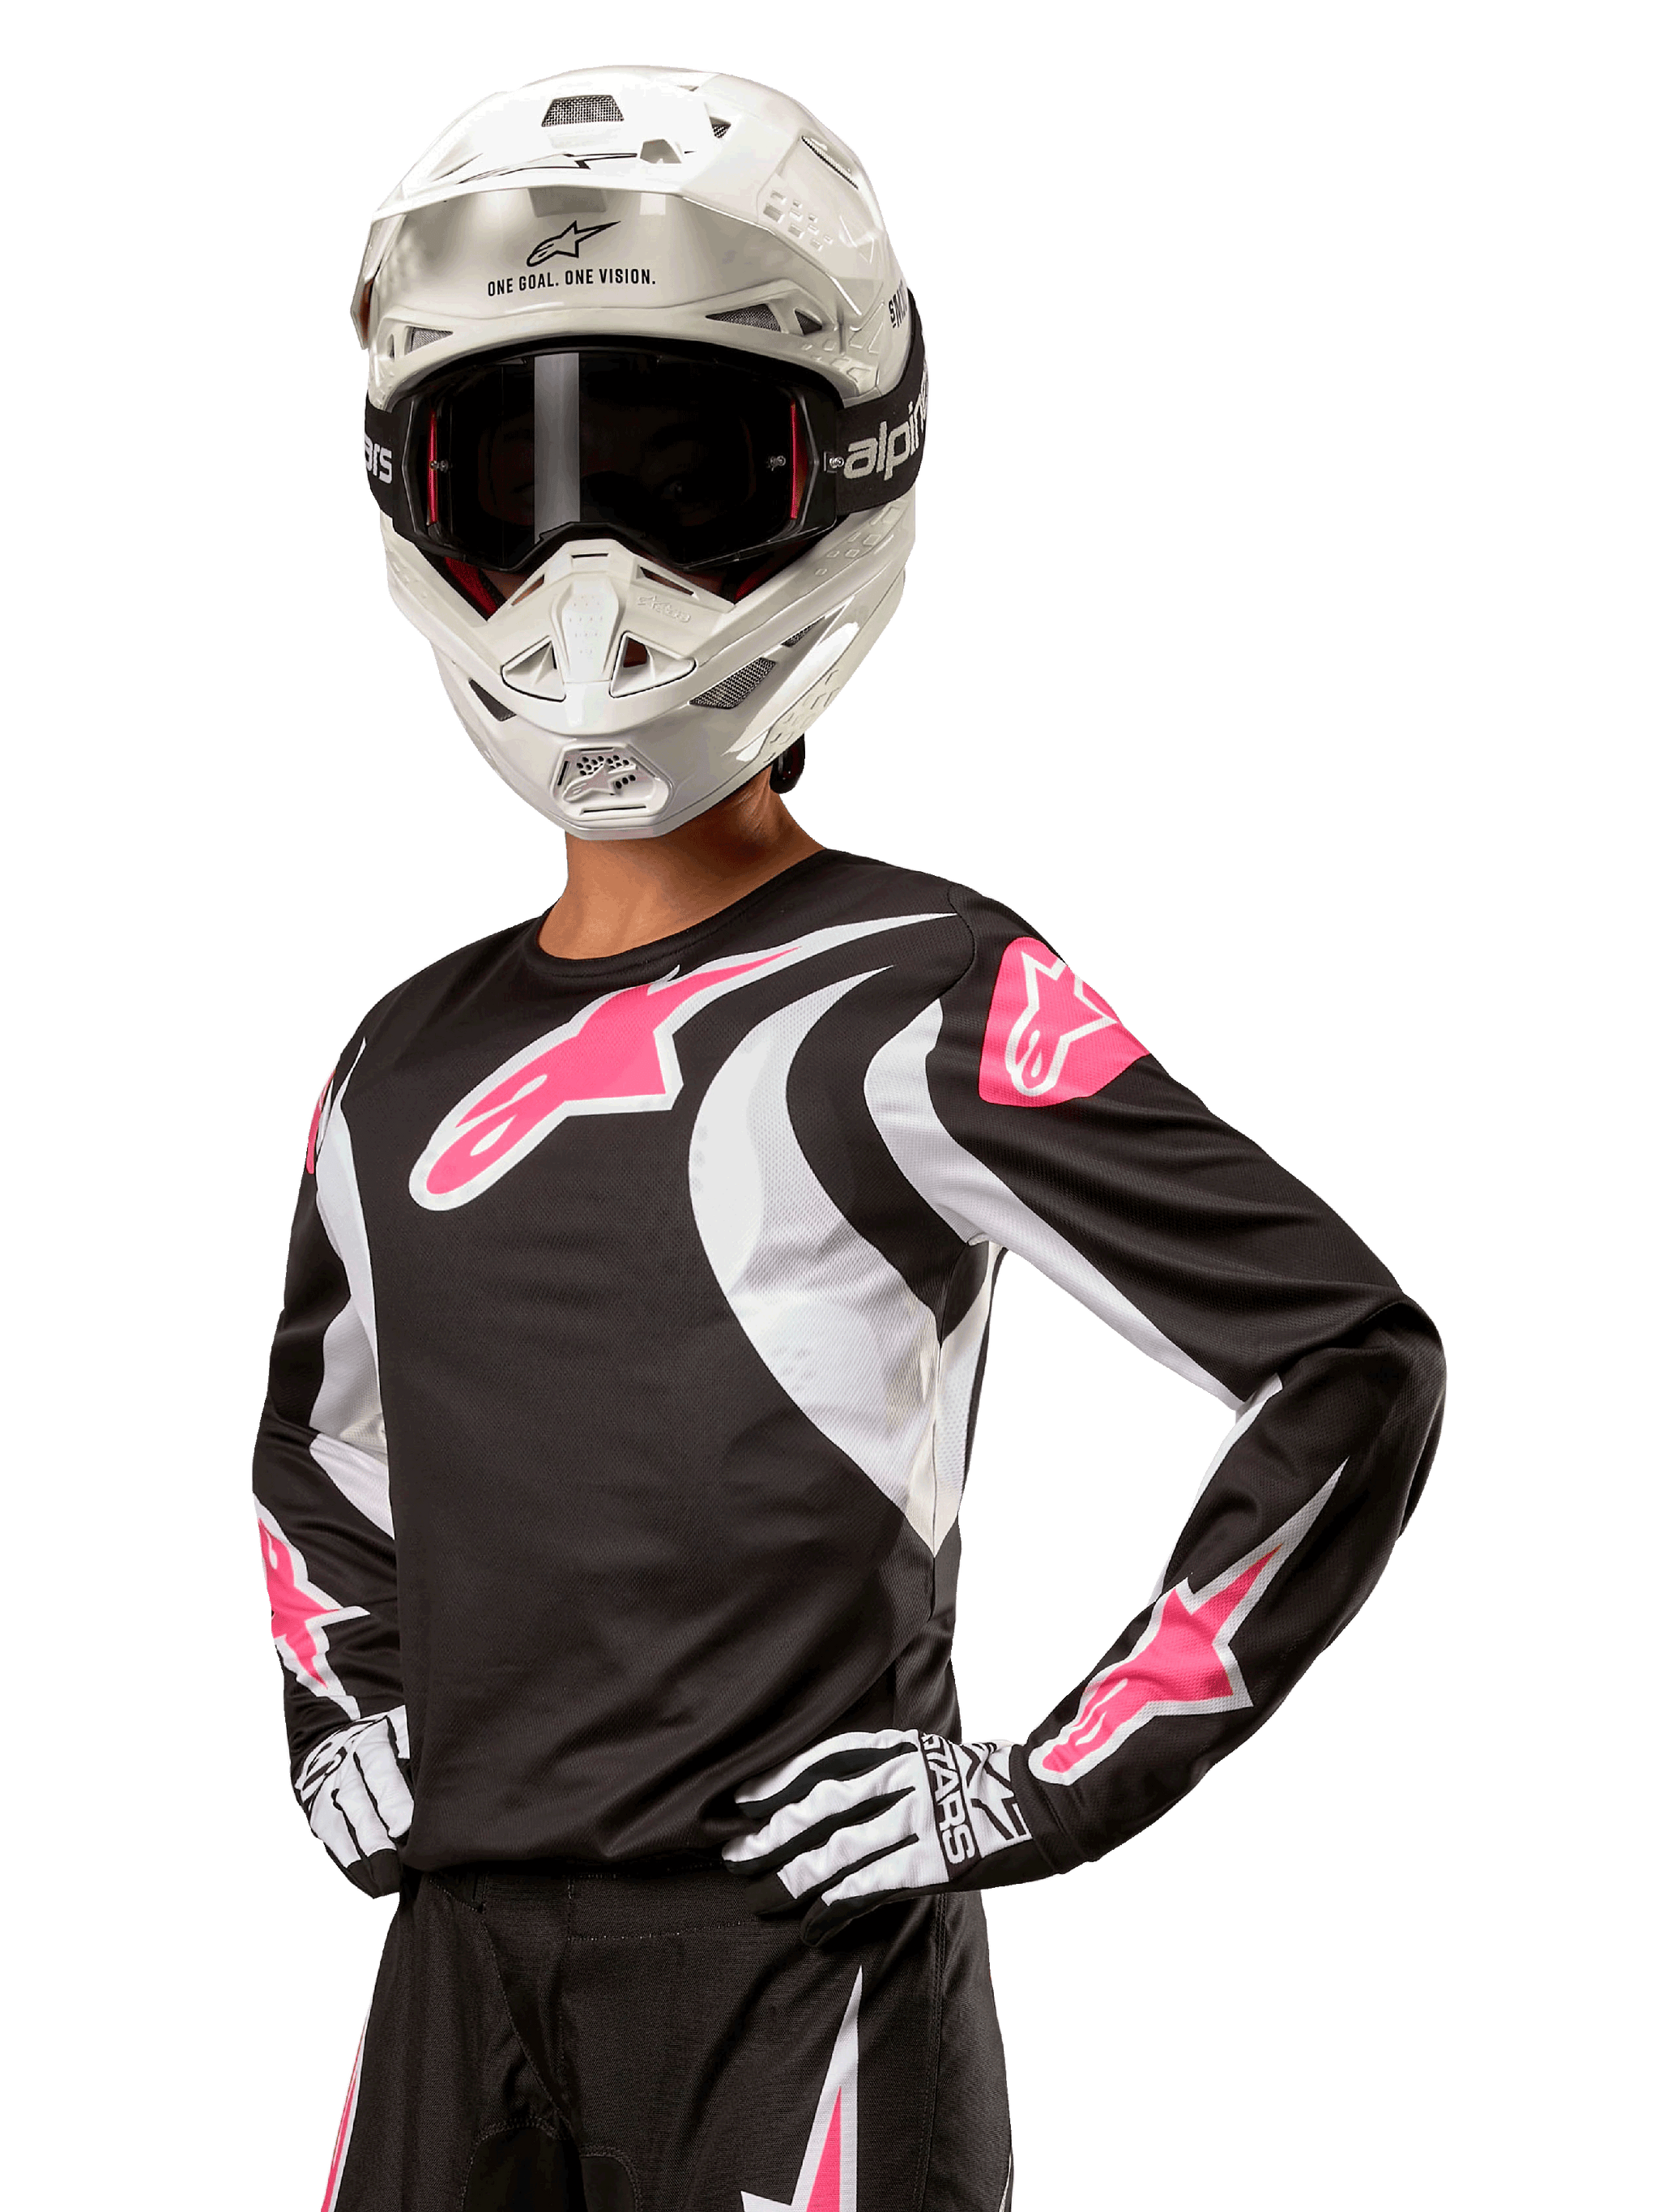 Women's MX Collection | Alpinestars® Official Site